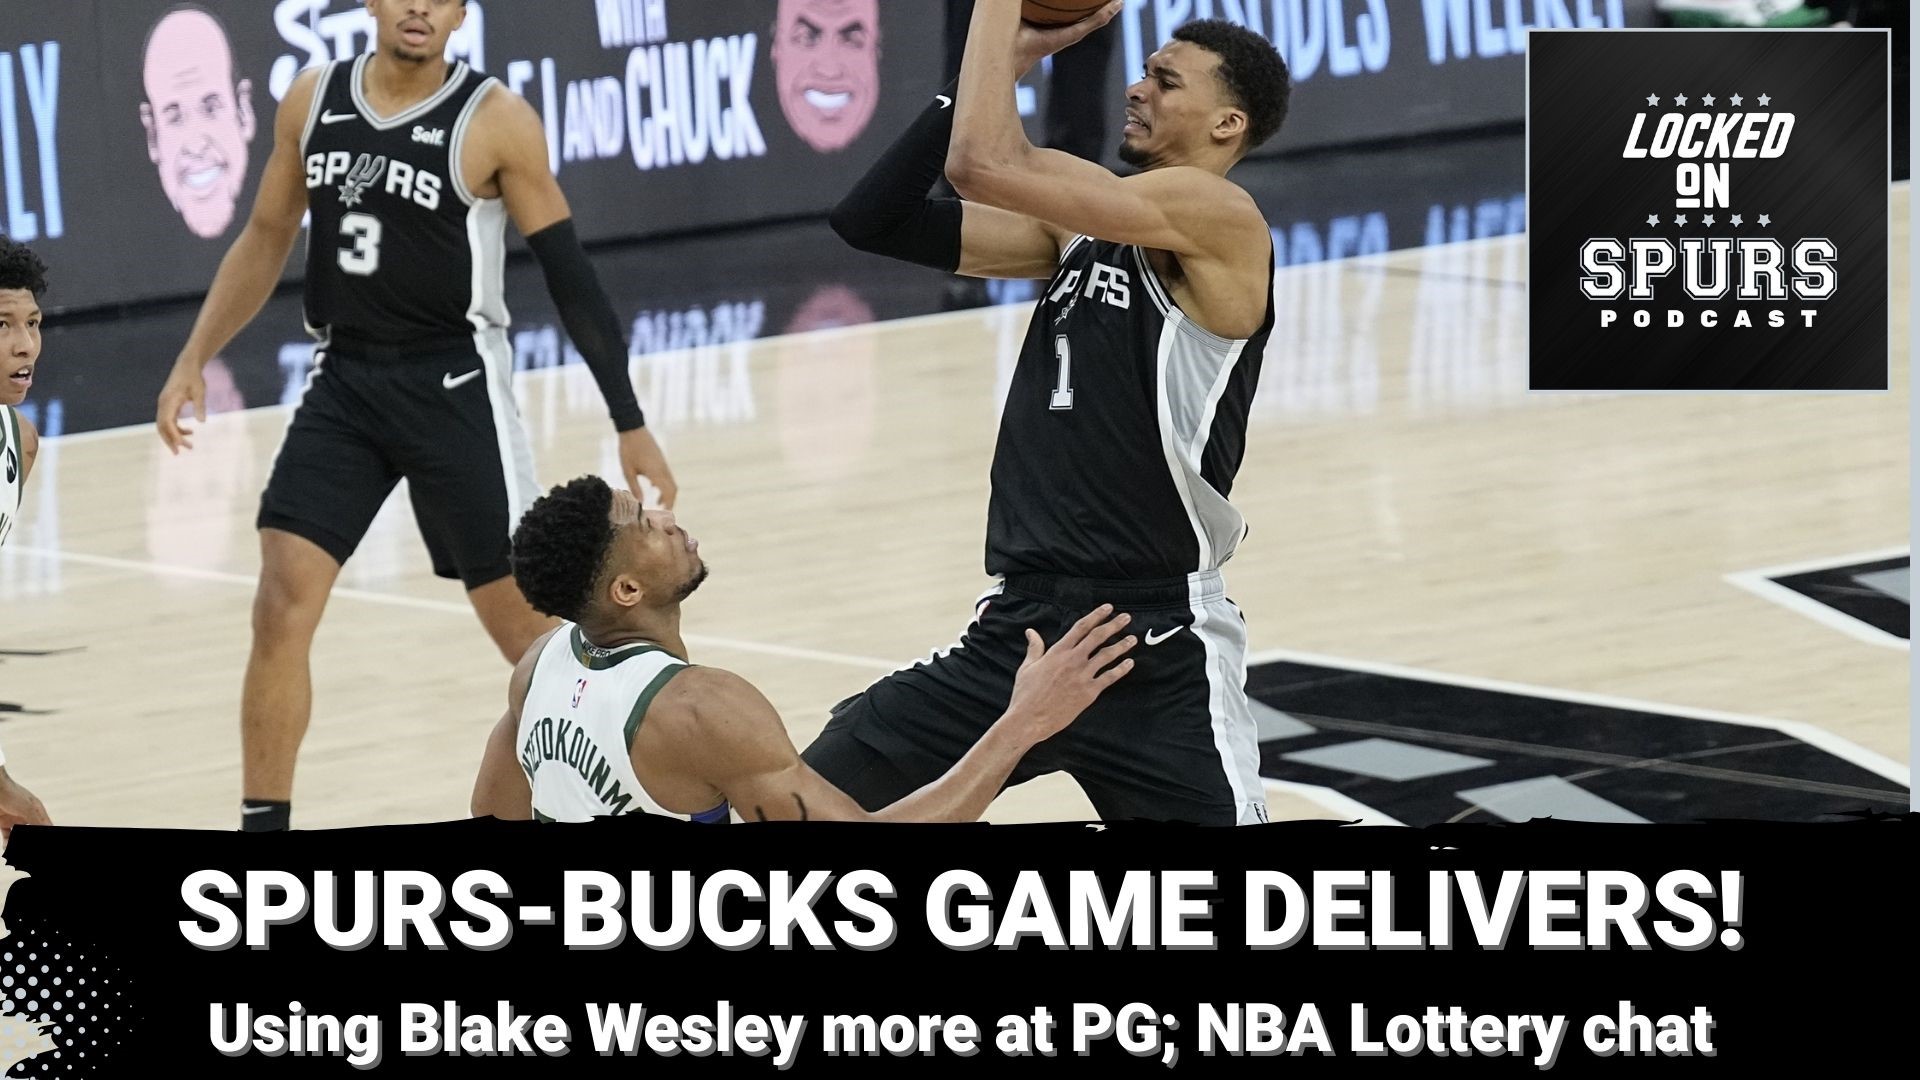 It was a thrilling game but the Spurs could not secure the win over the Bucks.